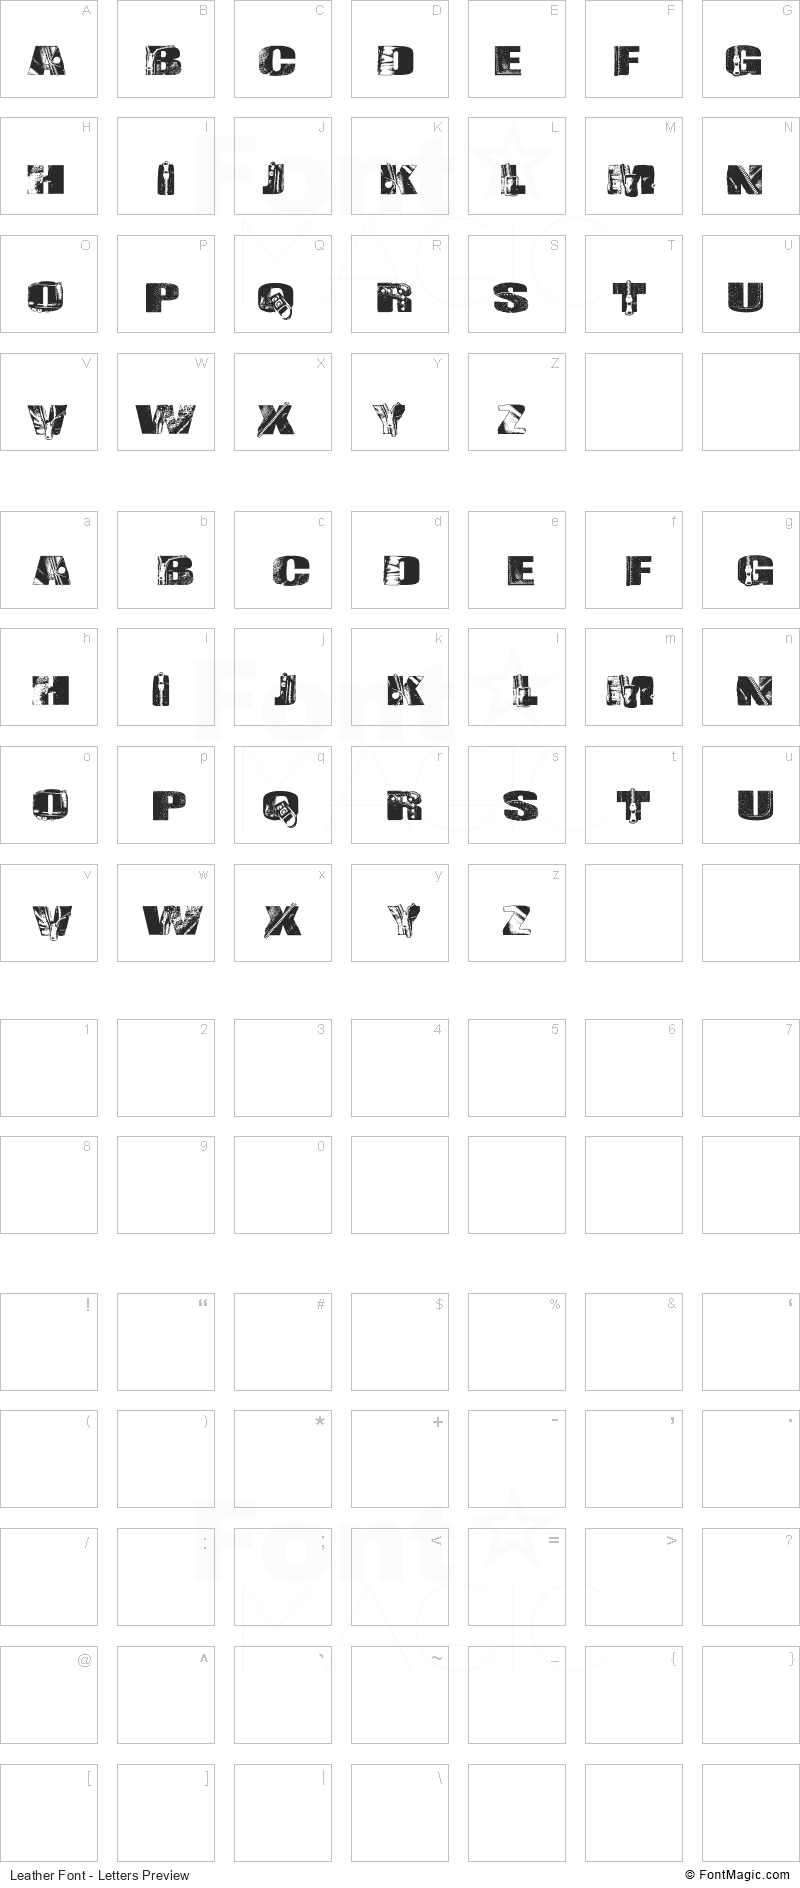 Leather Font - All Latters Preview Chart